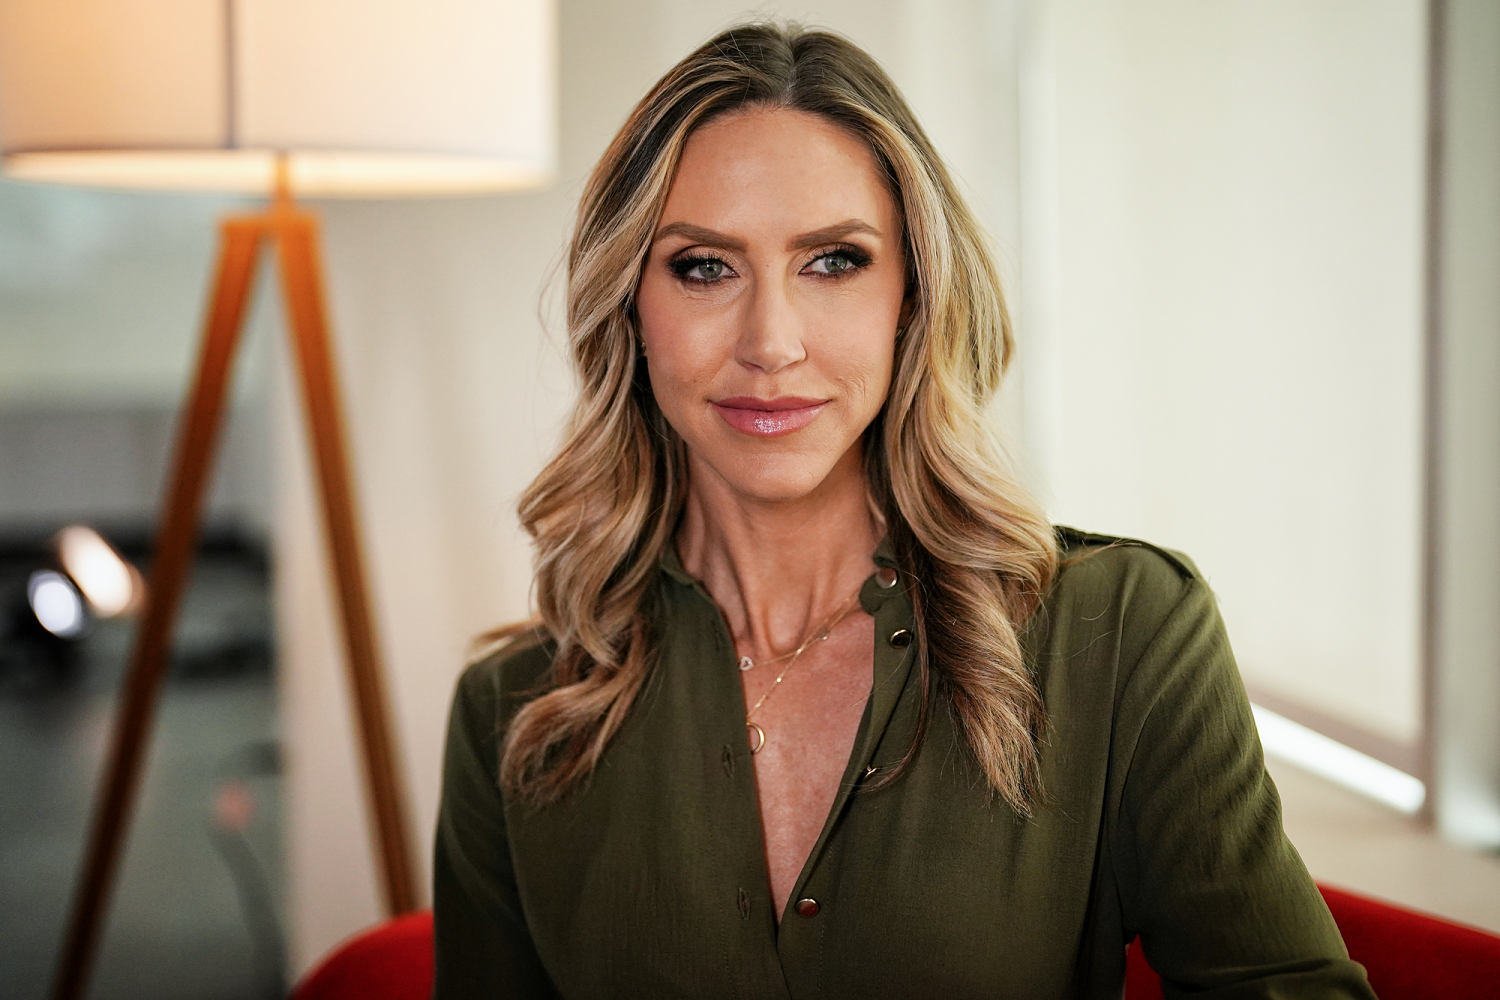 Lara Trump says 2020 election is 'in the past' even as Donald Trump keeps bringing it up